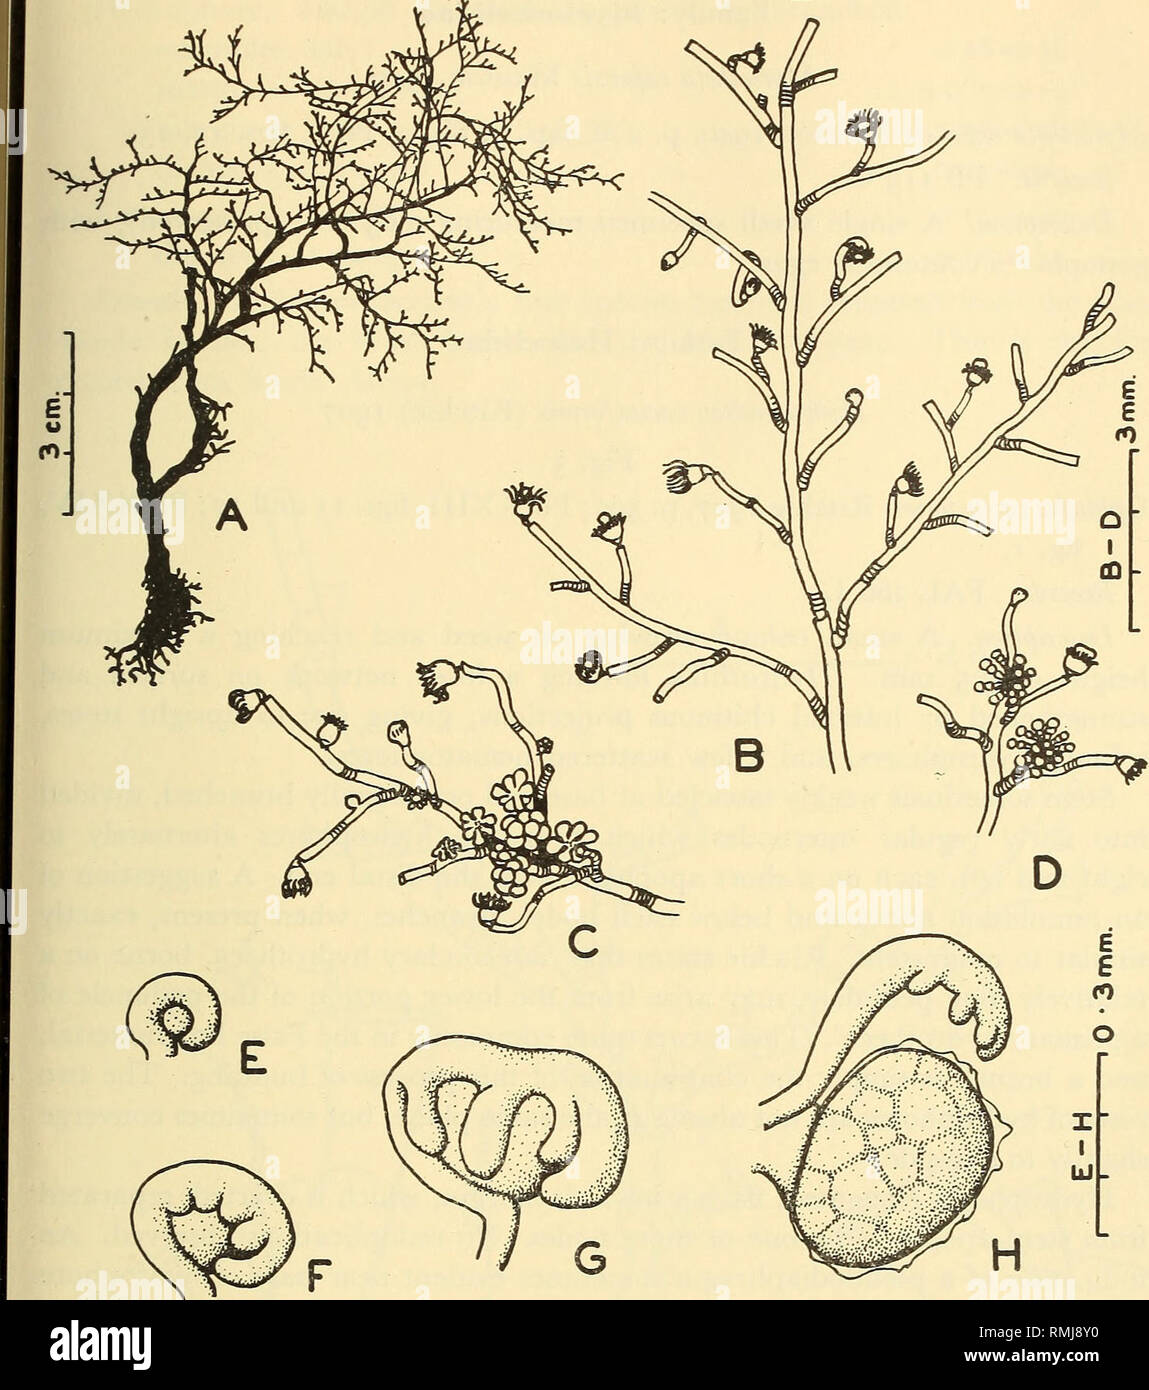 . Annals of the South African Museum = Annale van die Suid-Afrikaanse Museum. Natural history. THE HYDROZOA OF FALSE BAY, SOUTH AFRICA l85. Fig. 2. Eudendrium deciduum n. sp. from the holotype. A. Whole colony. B. Portion of sterile colony. C. Branch bearing female gonophores in various stages of development. D. A branch bearing two groups of male gonophores. E-H. Stages in development of the female gonophore (see text). of the hydranth, and in the absence of an endodermal plug in the gastral cavity. E. racemosum (Gmelin) differs in the form of the female gonophore, which has a forked spadix.  Stock Photo